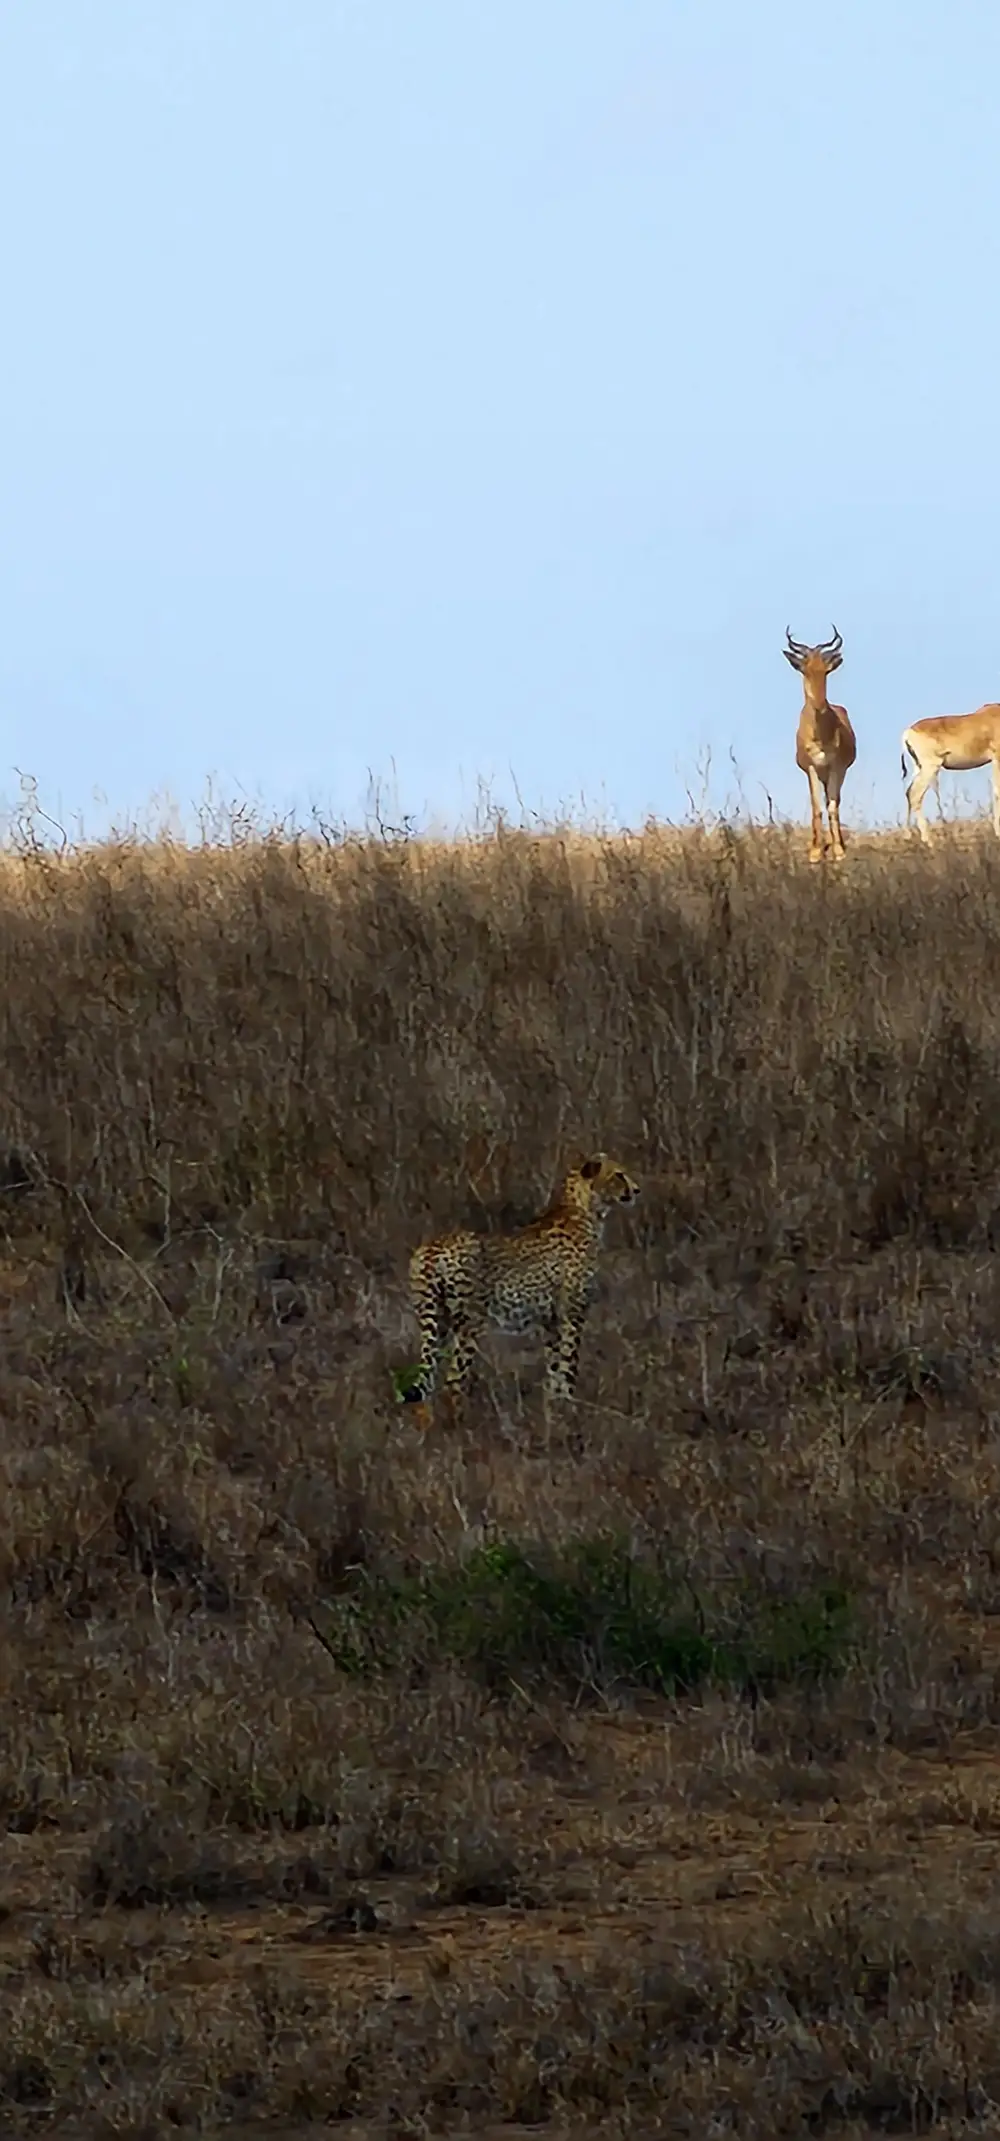 A leopard and two deers